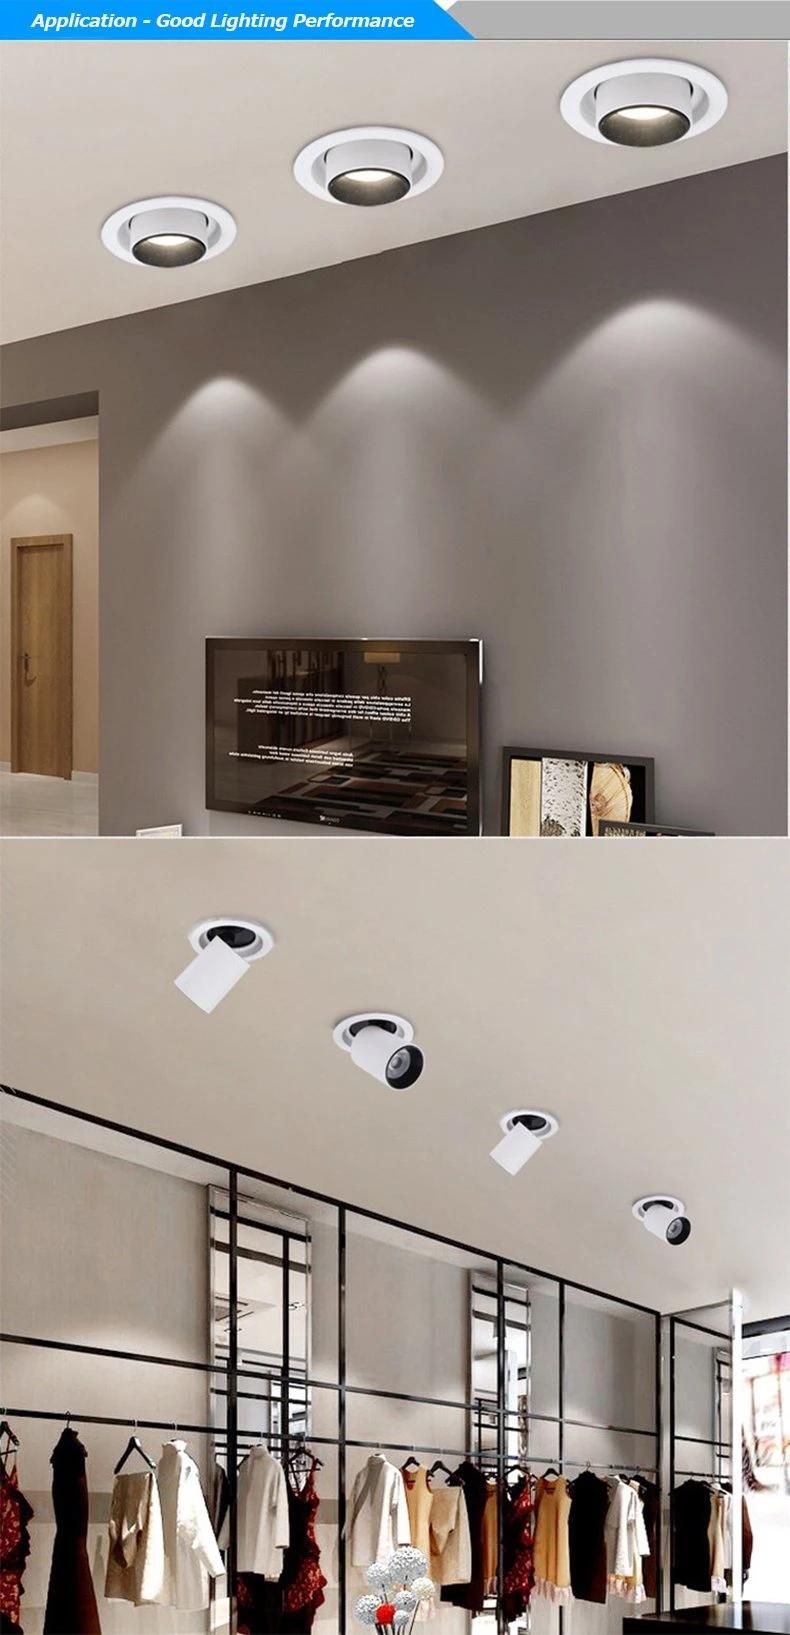 CREE COB LED Residential Indoor Decorative Ceiling Light LED Spot Downlight 7W 10W 15W